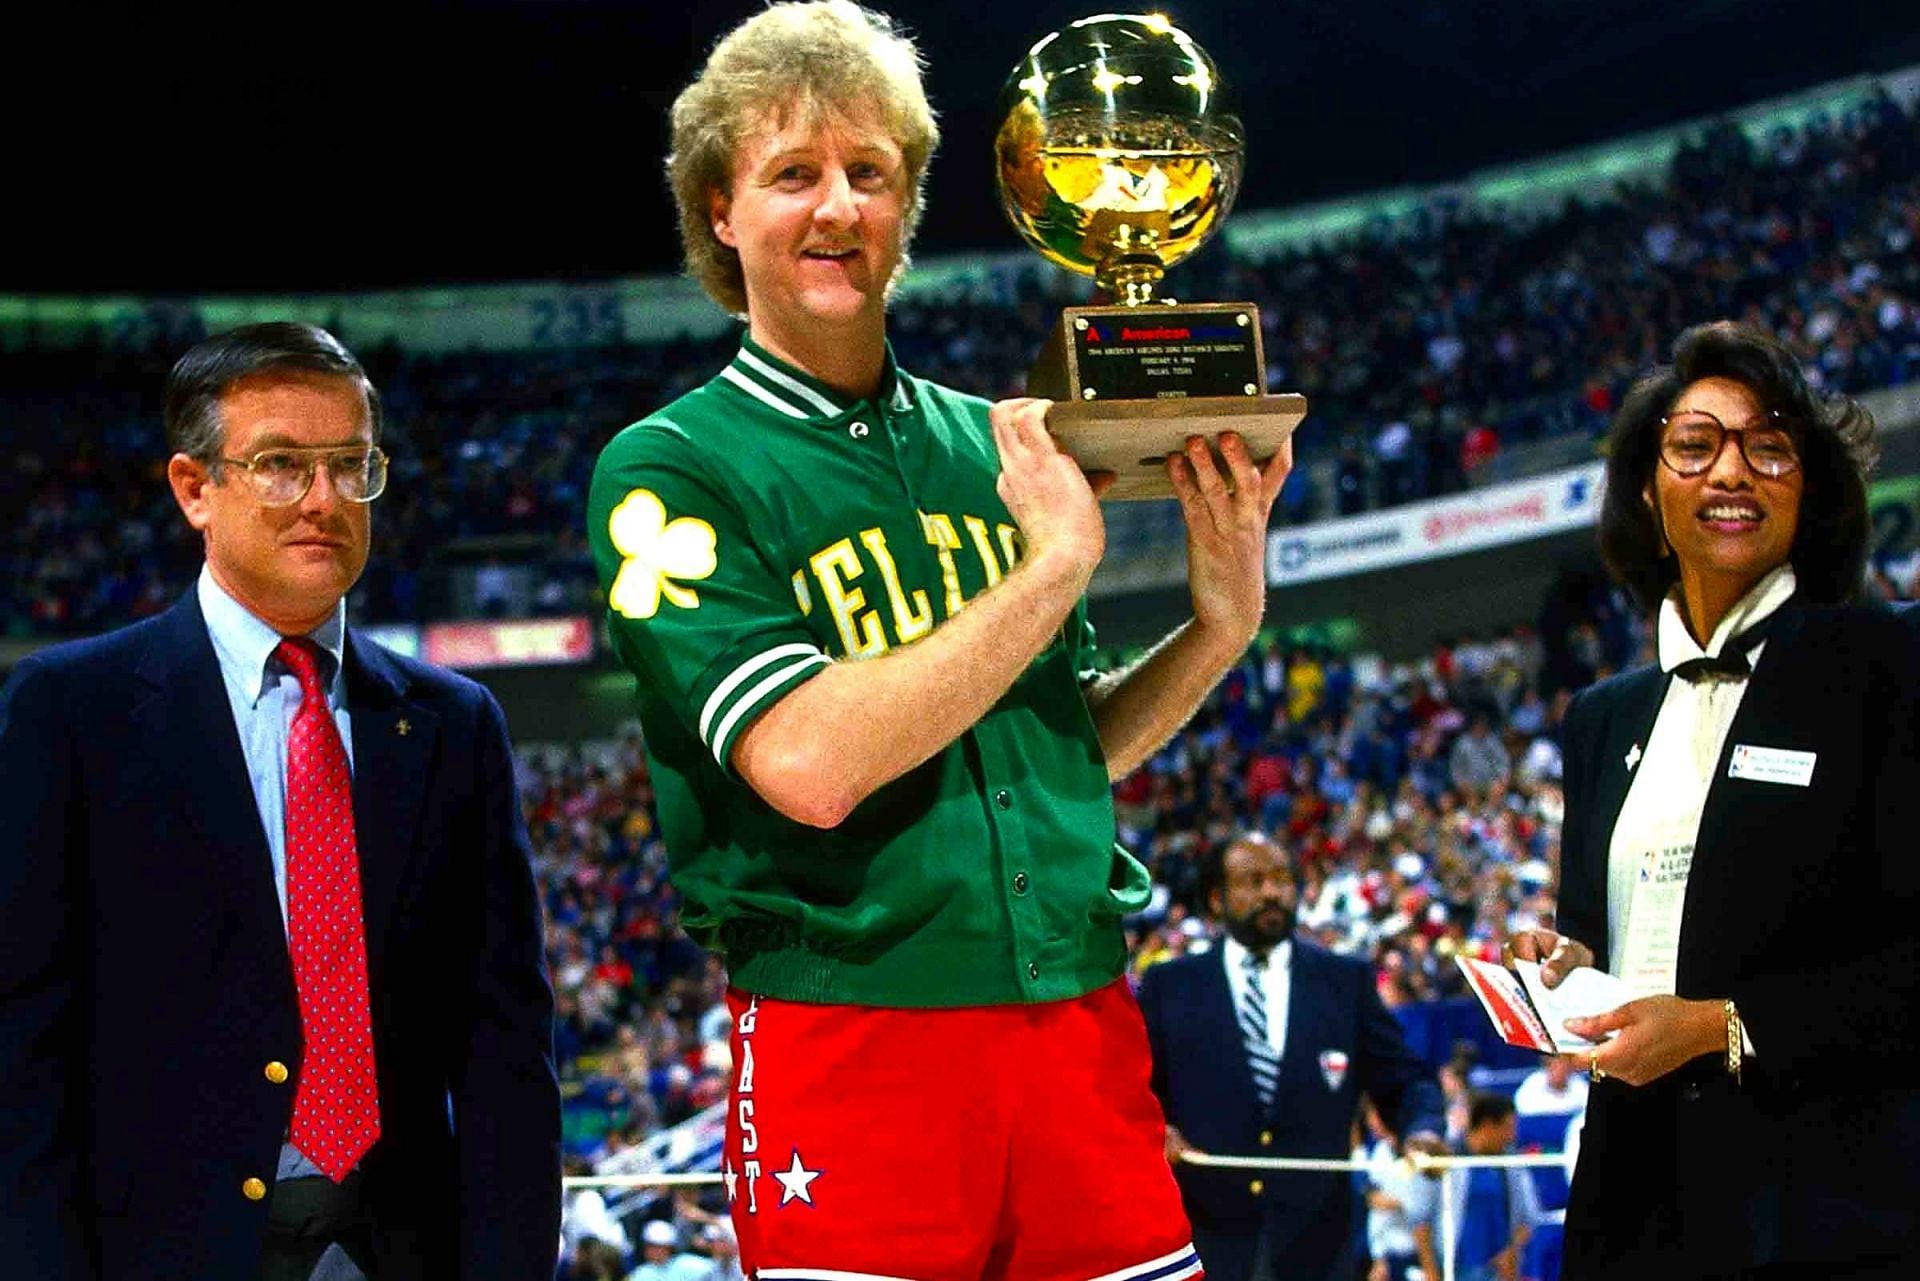 Watch "Who's coming in second?" Throwback to when Larry Bird won his